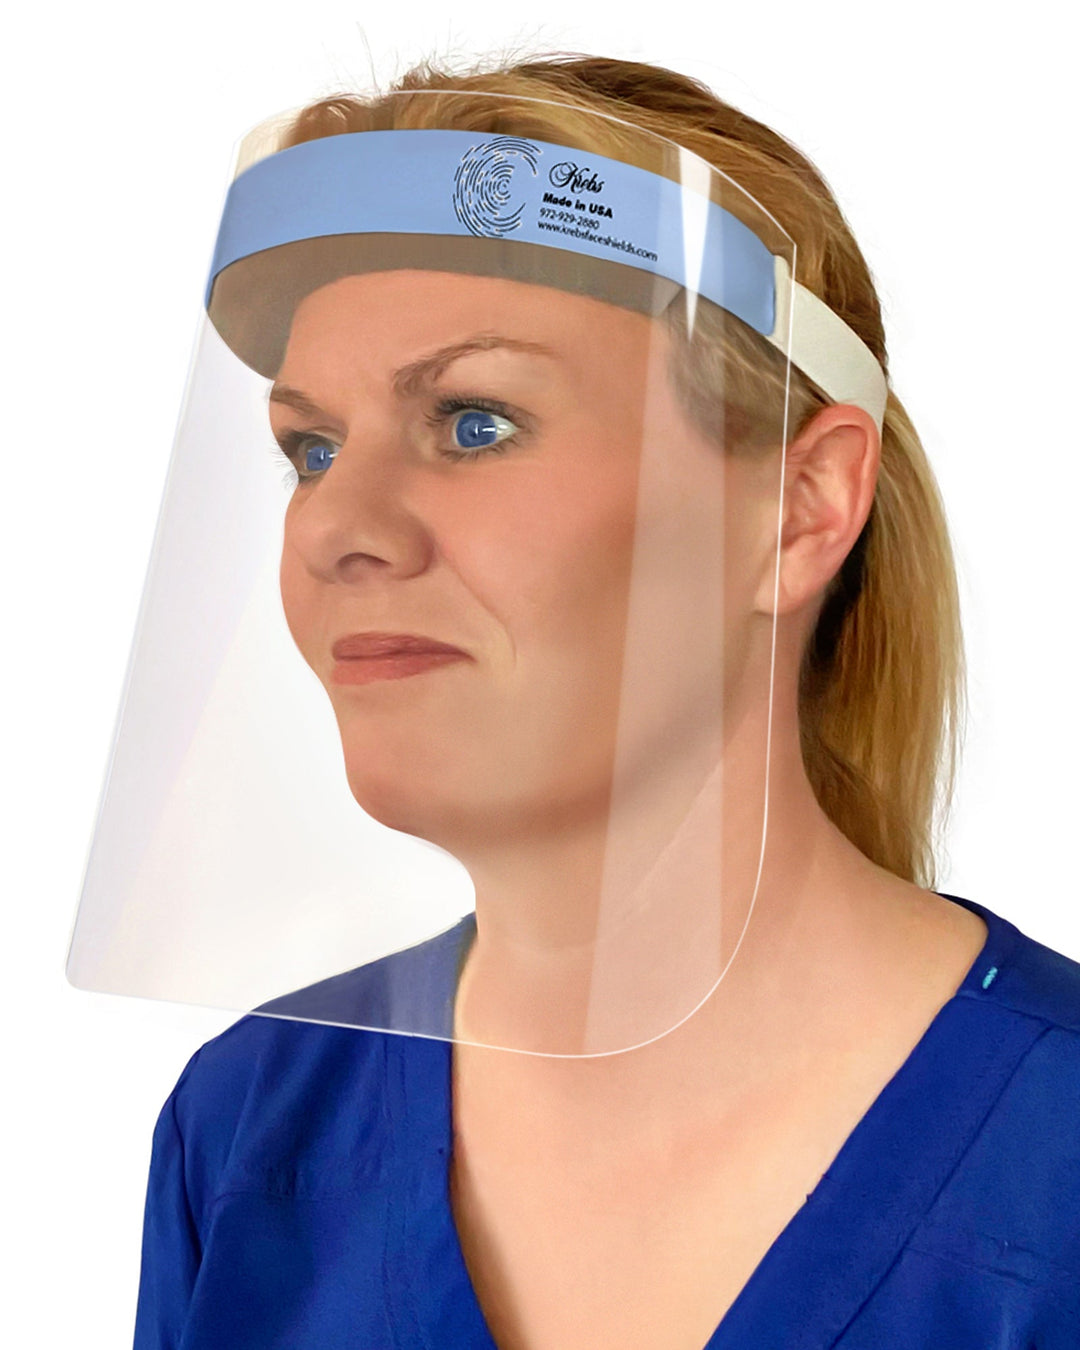 2-Pack Lightweight Safety Medical Face Shields - Anti-Fog, Anti-Static, Hypoallergenic (Ceil Blue)